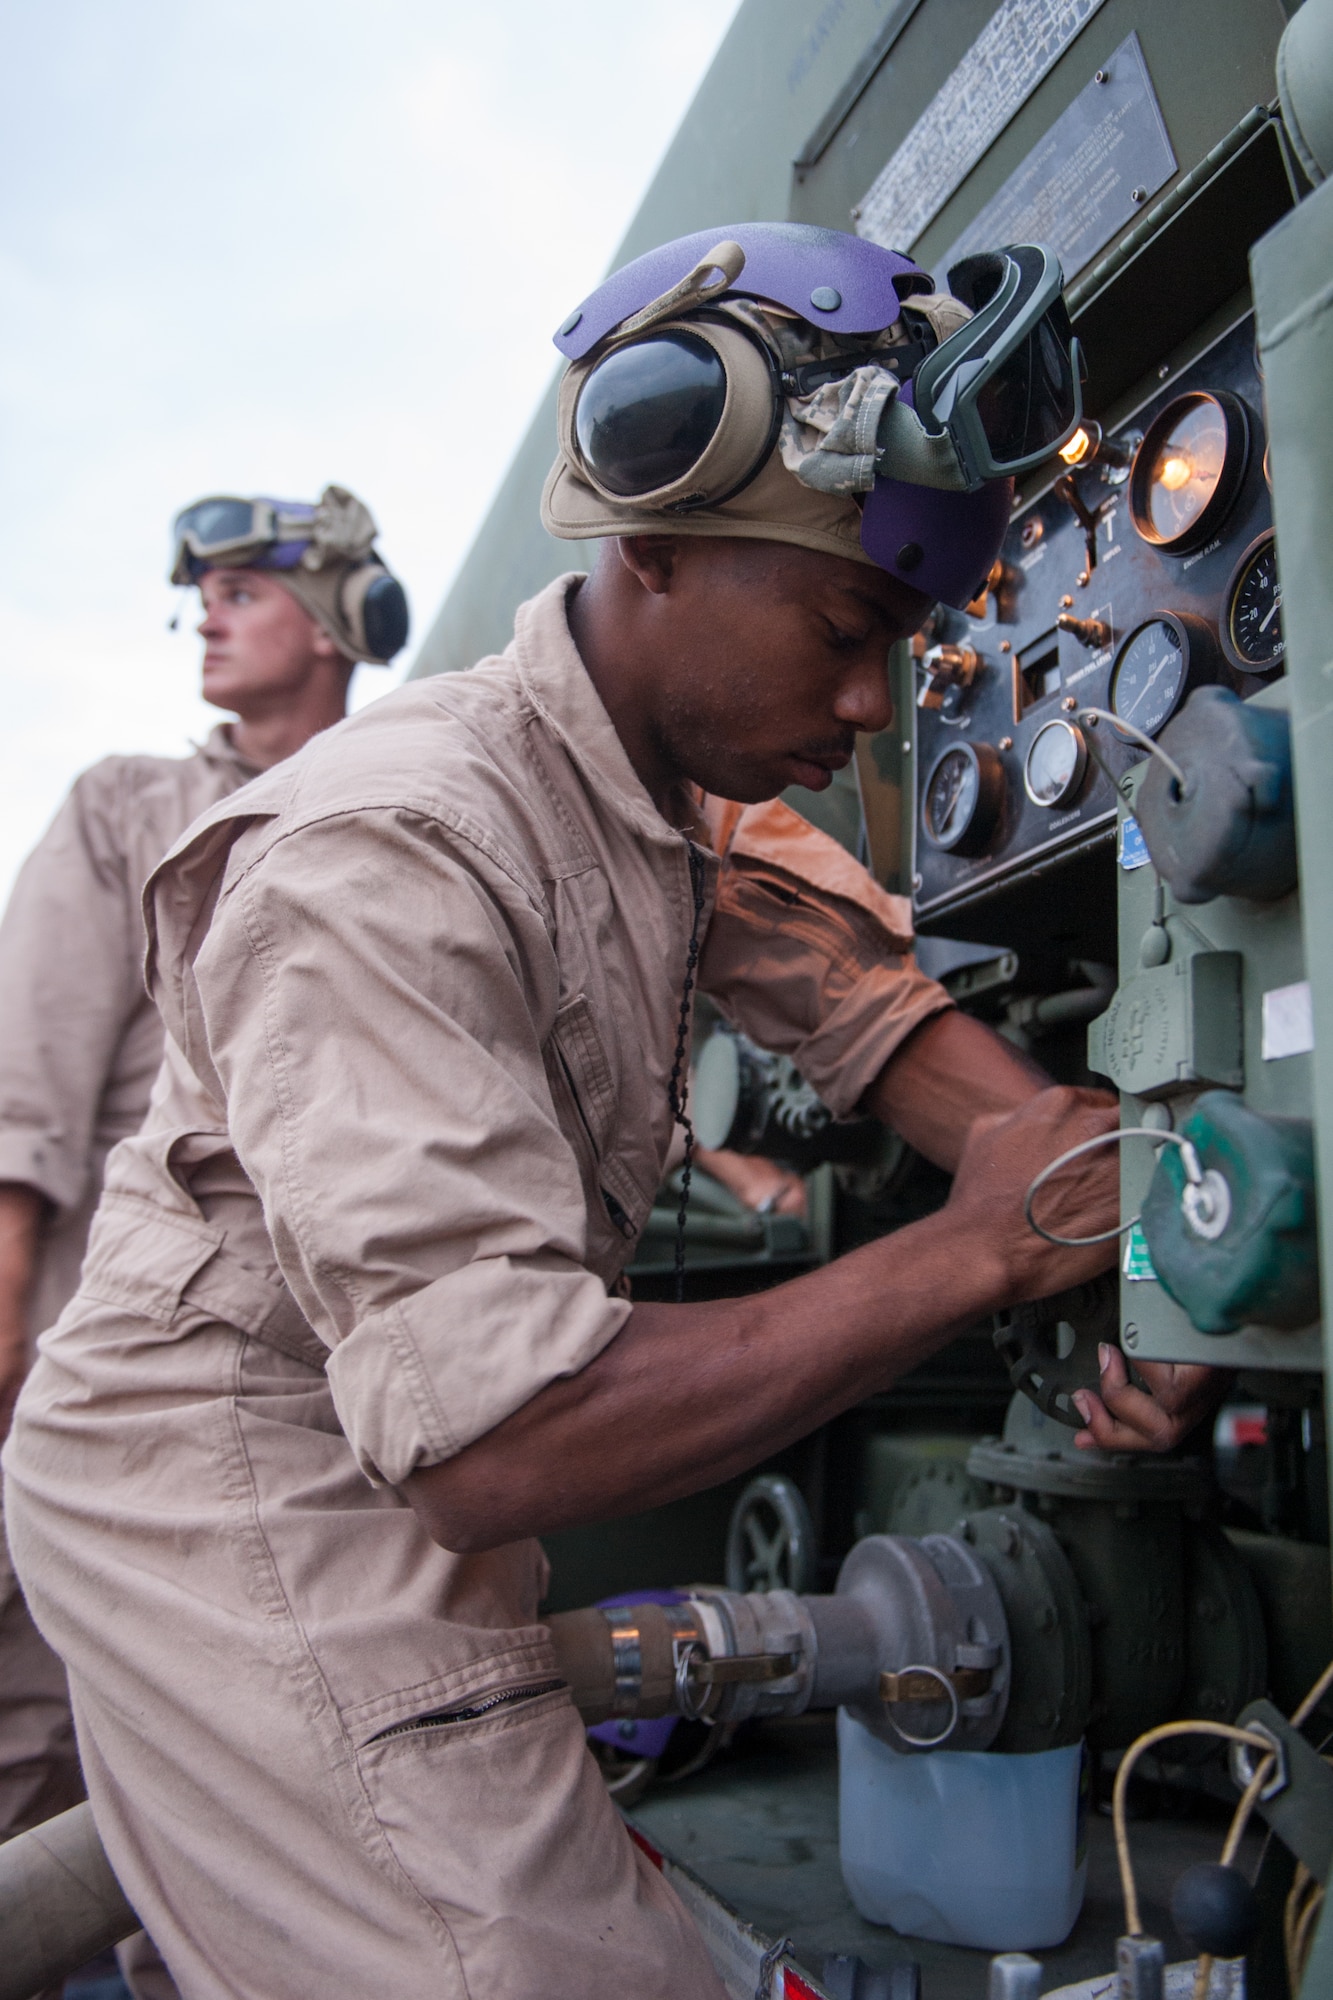 U.S. Marine Cpl. Eric A. Robinson, assigned to the 273rd Marine Wing Support Squadron, Air Operations Company, stops the transfer of fuel from an N-90 fuel truck to a rotary wing aircraft during forward air refueling point operations at McEntire Joint National Guard Base, S.C. on May 14, 2014. Elements of the South Carolina Air and Army National Guard and the U.S. Marines conduct joint operations which are crucial to the ongoing success of operational readiness and deployments around the world.  (U.S. Air National Guard photo by Tech Sgt. Jorge Intriago/Released)